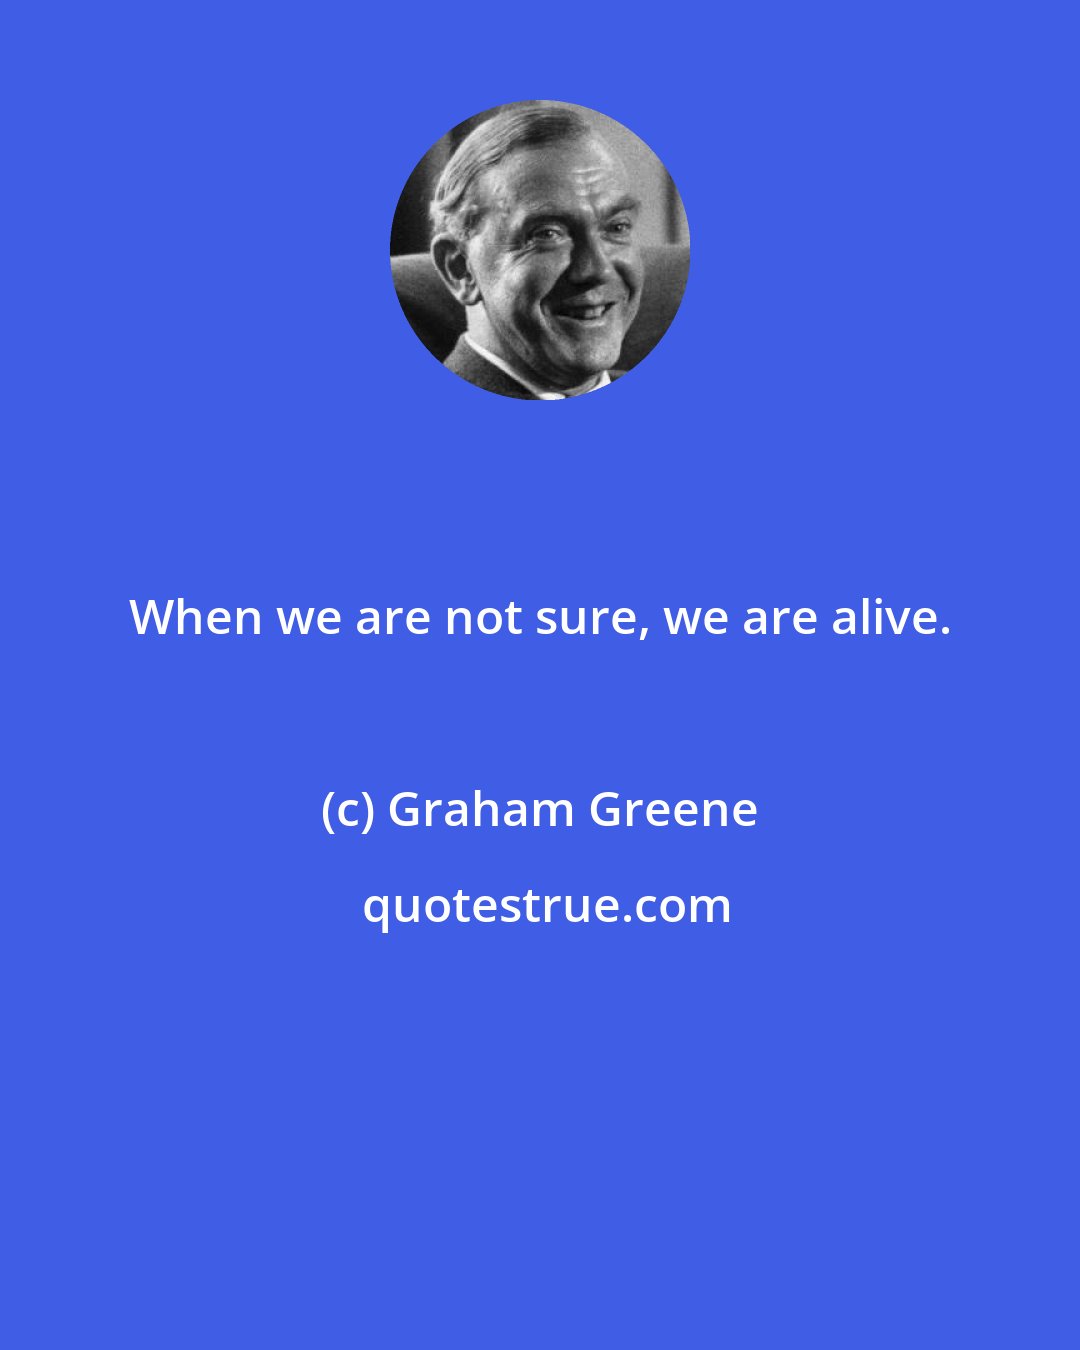 Graham Greene: When we are not sure, we are alive.